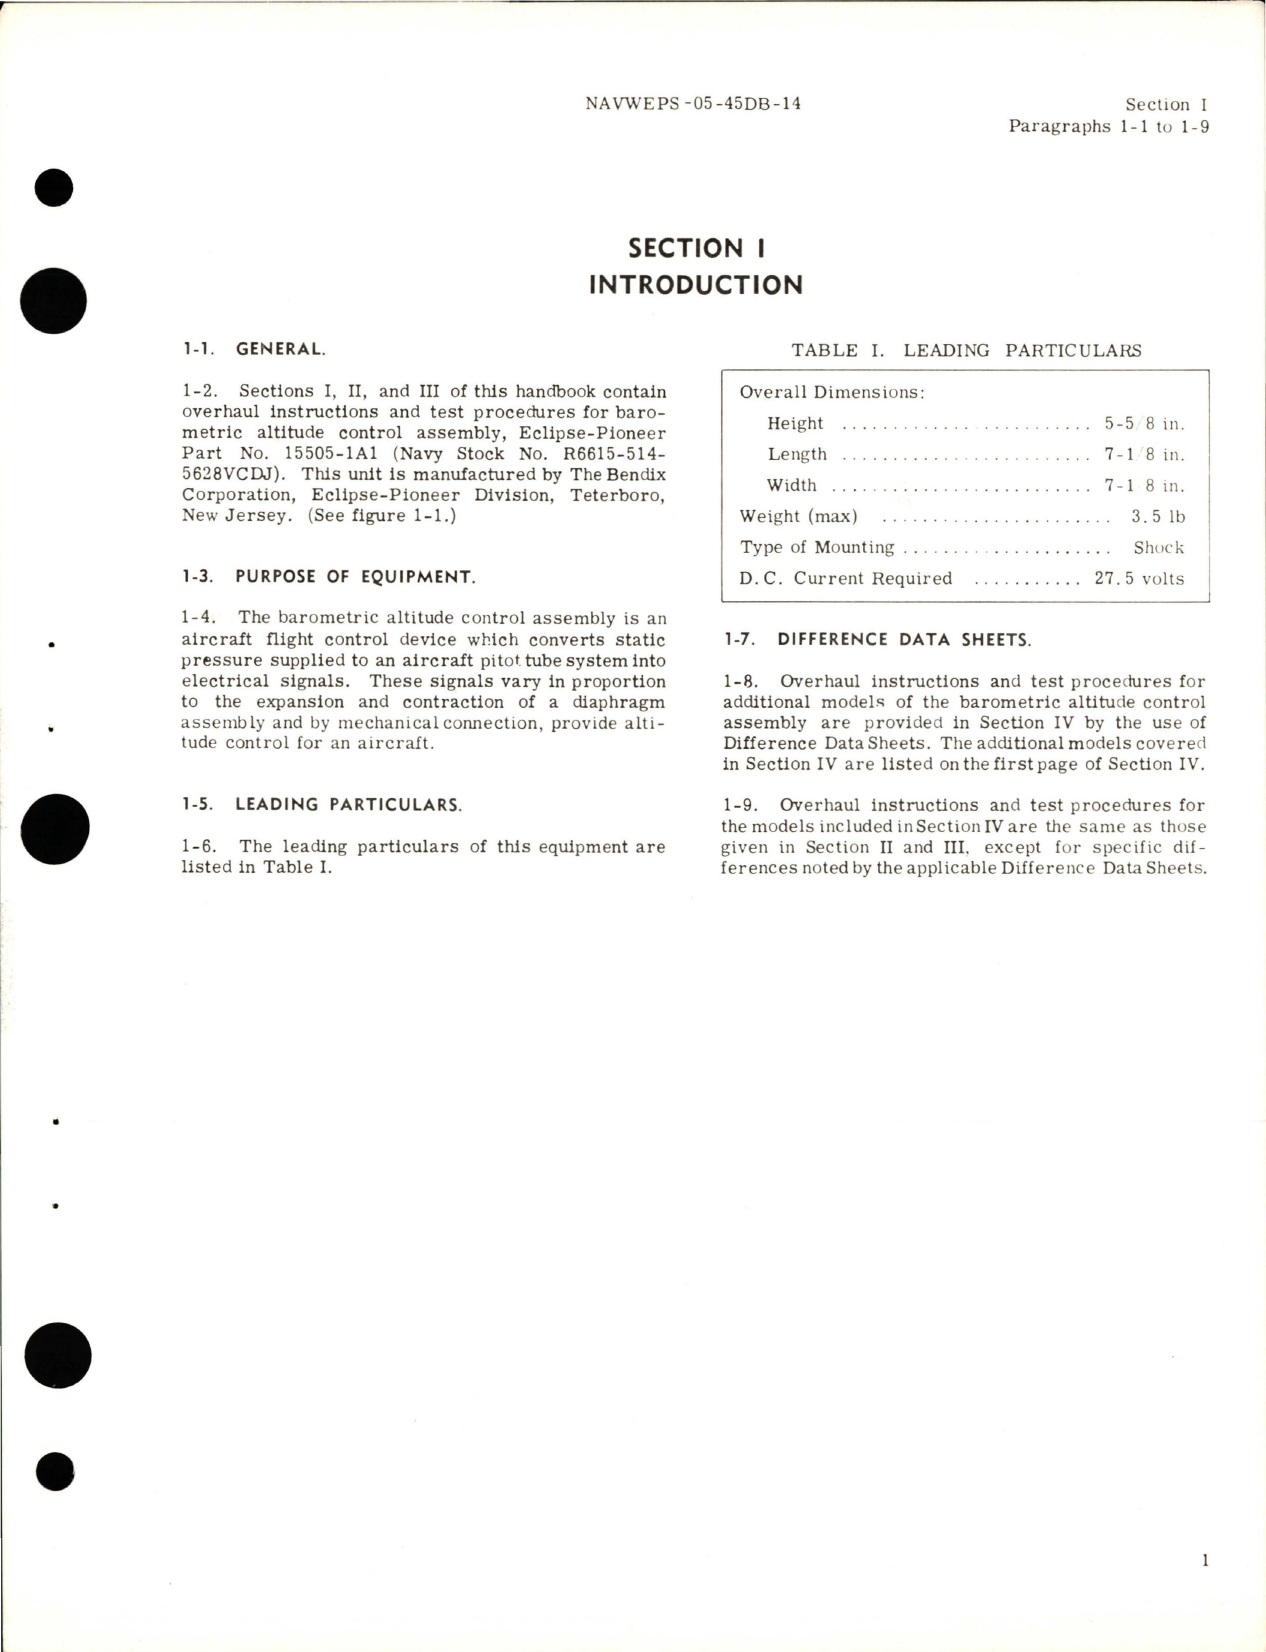 Sample page 5 from AirCorps Library document: Overhaul Instructions for Barometric Altitude Control Assembly